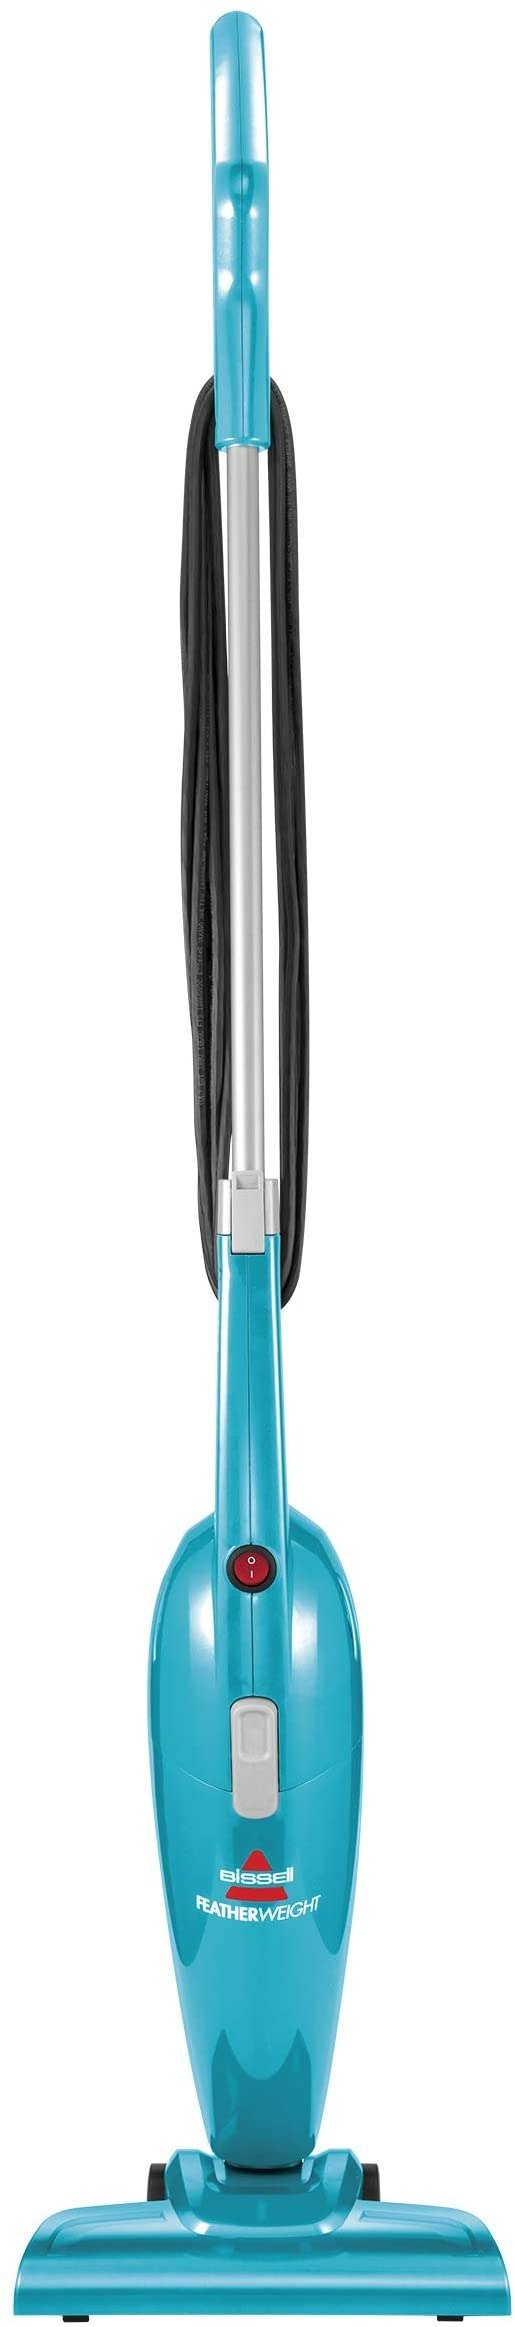 Featherweight Stick Lightweight Bagless Vacuum With Crevice Tool, One Size Fits All